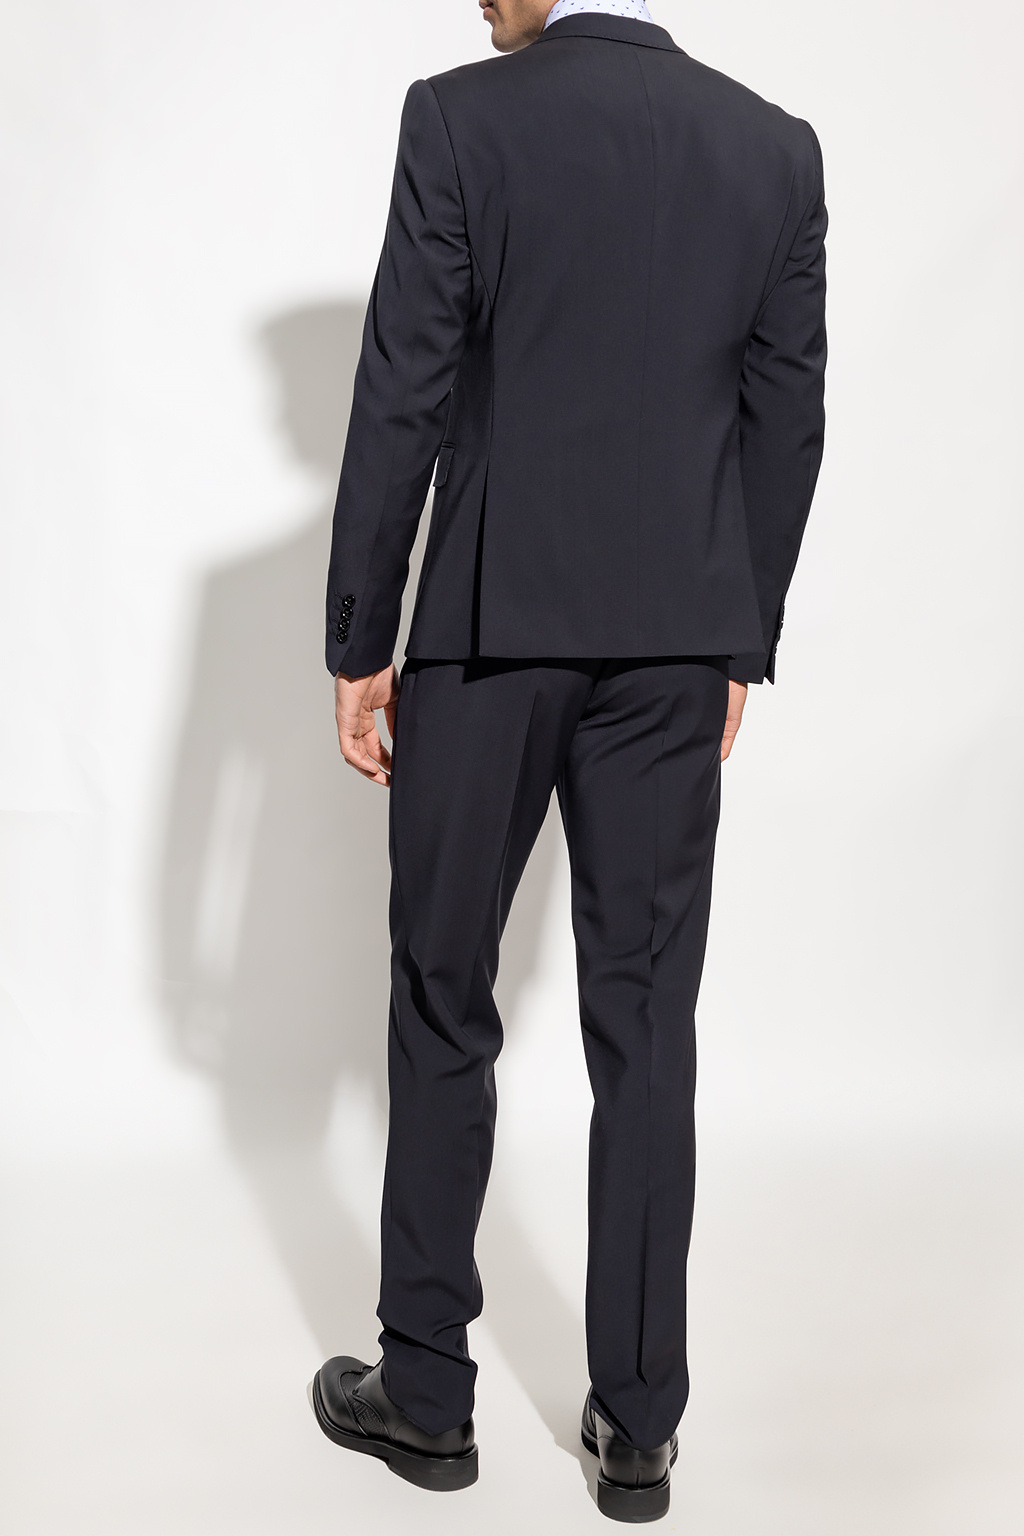 Emporio embroidered armani Wool suit